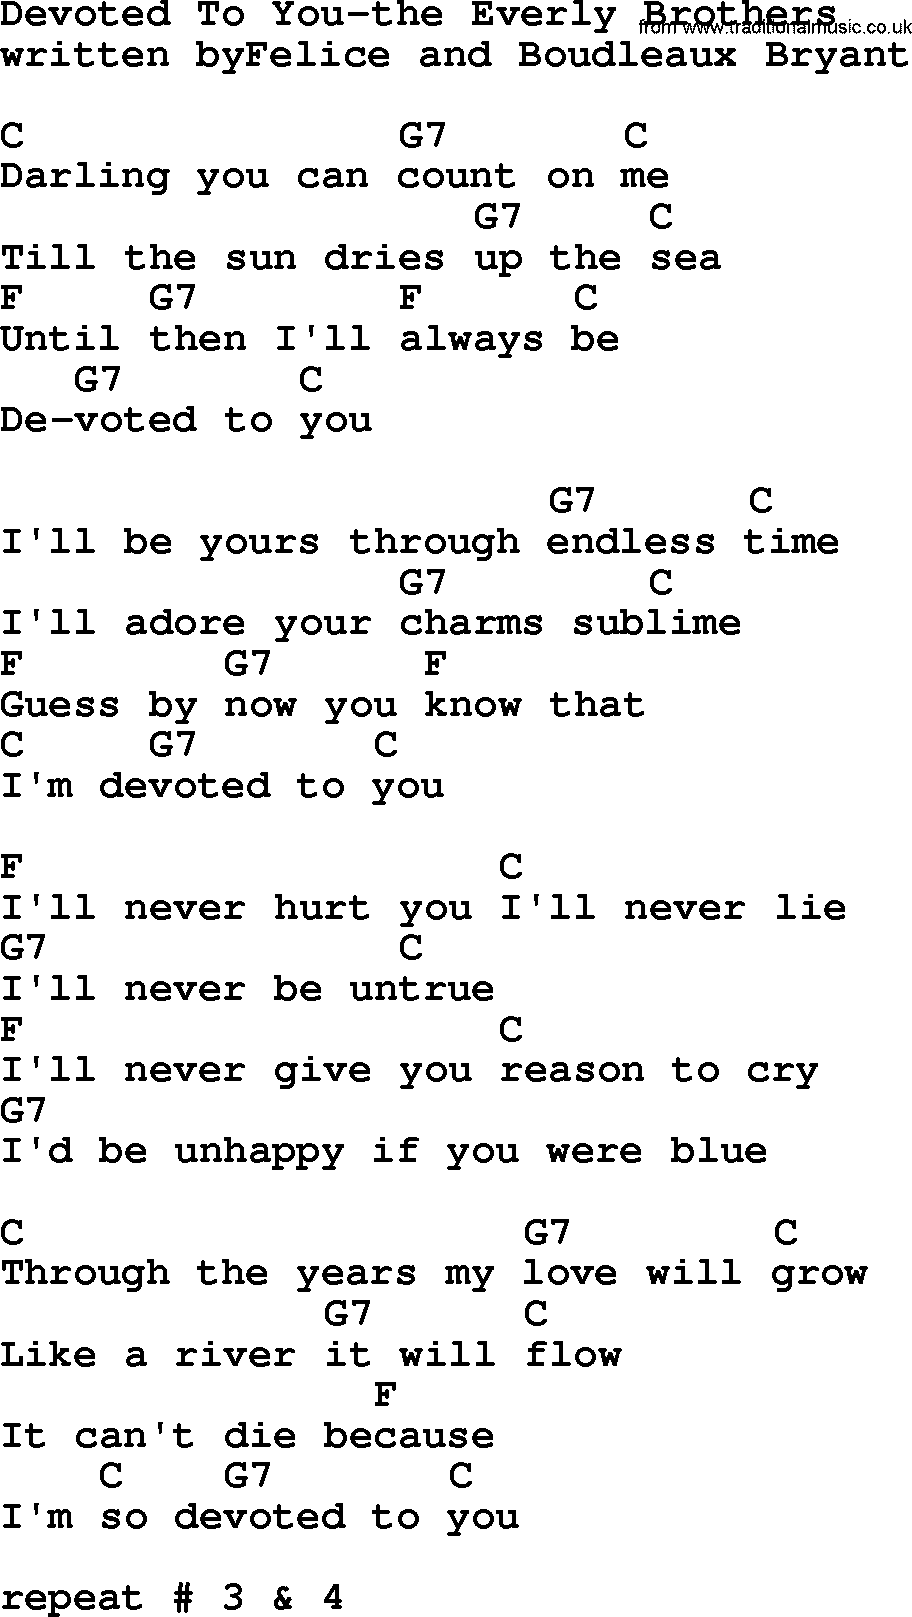 Country music song: Devoted To You-The Everly Brothers lyrics and chords